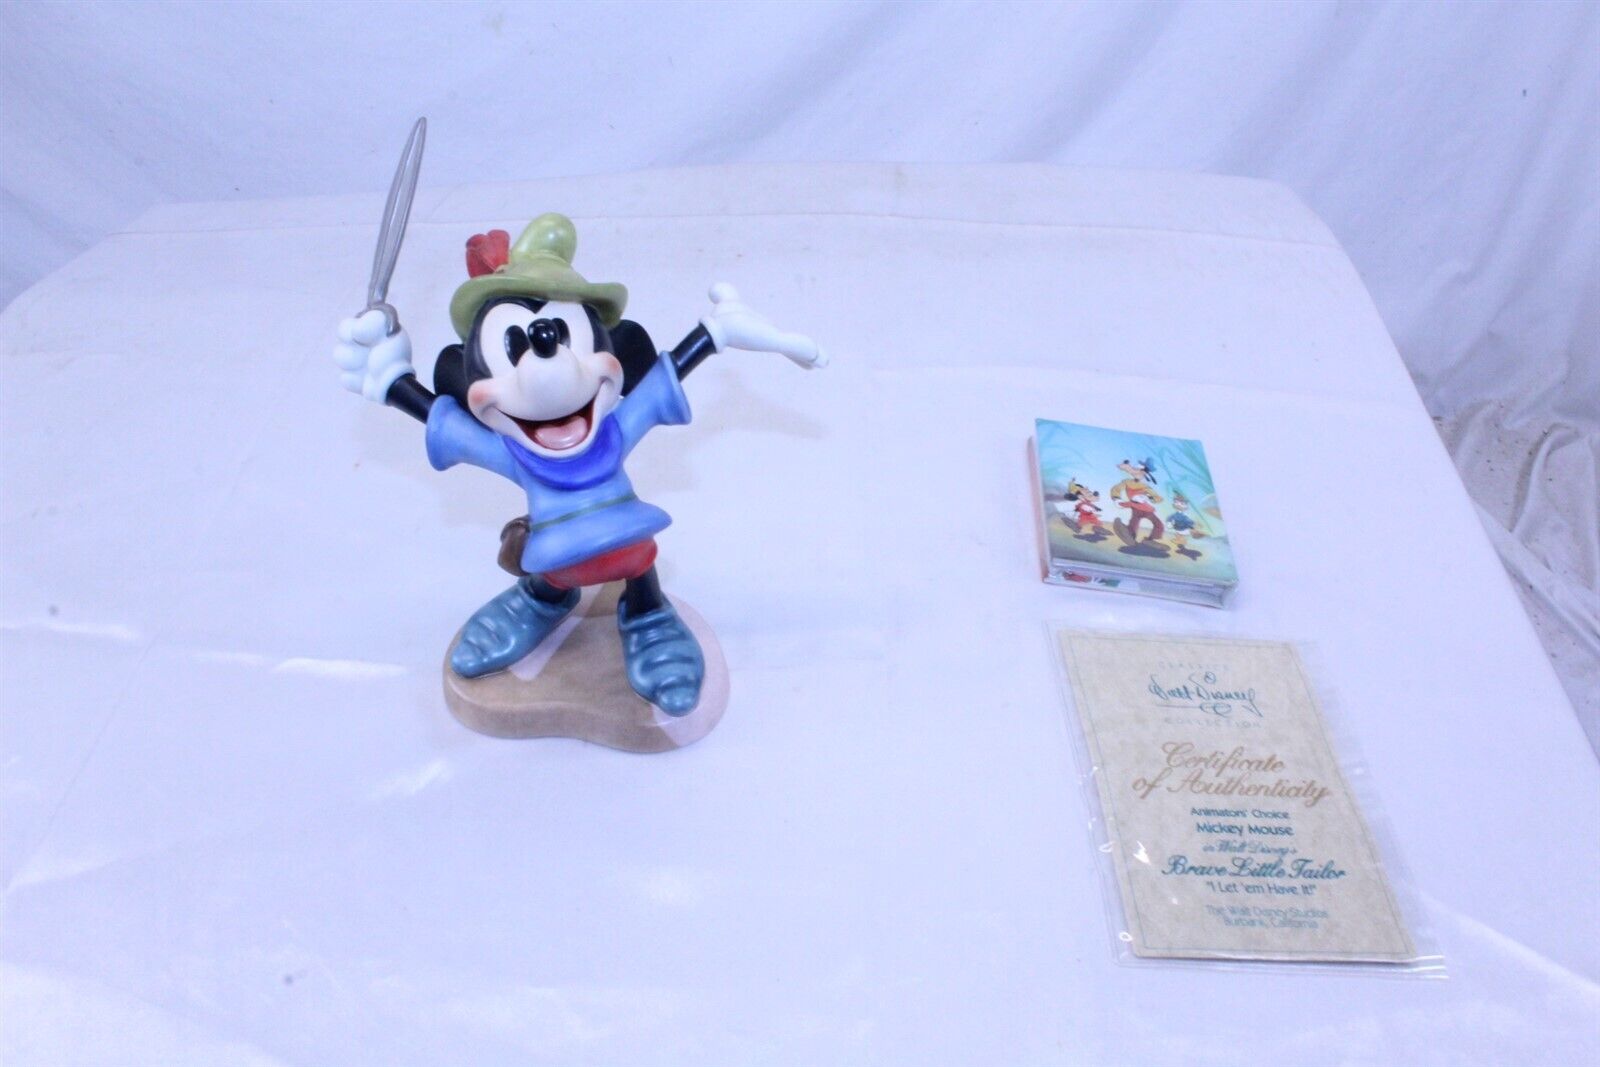 1993 Disney Collection Mickey Mouse Figurine Brave Little Tailor #41048